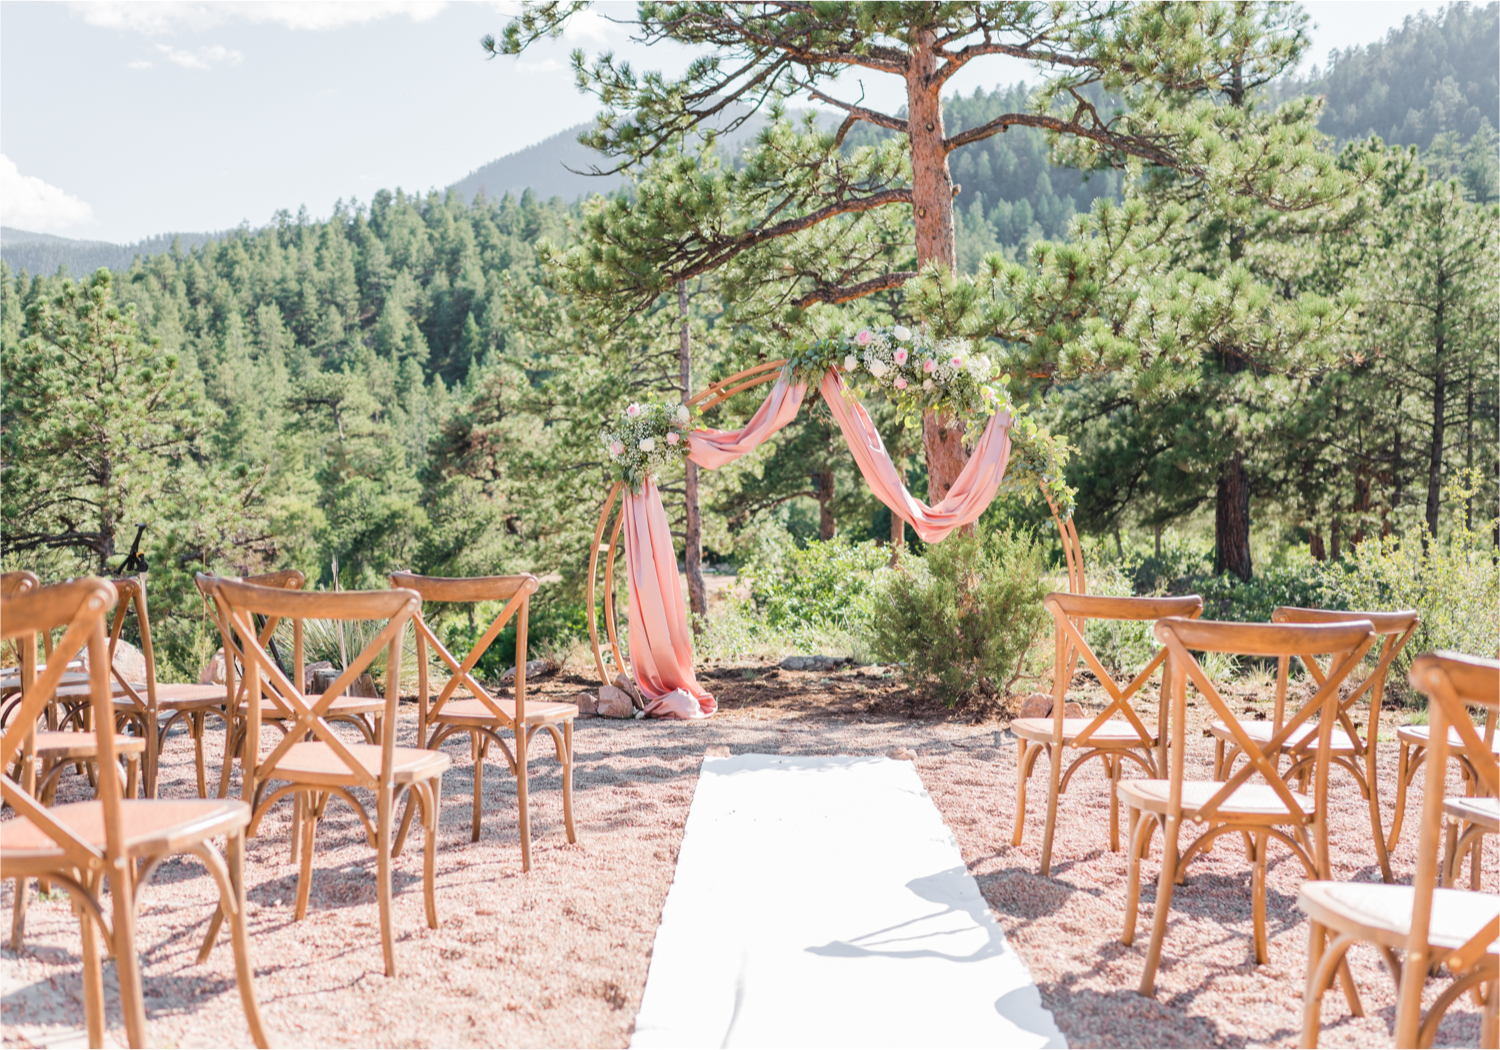 Autumn mountain wedding in Florence Colorado | Britni Girard Photography | Colorado Wedding Photo and Video Team | Mountainside Cabin for intimate wedding with rustic farm-tables and romantic details | Wedding Colors White, Dusty Rose and Sage | Florals by Skyway Creations 